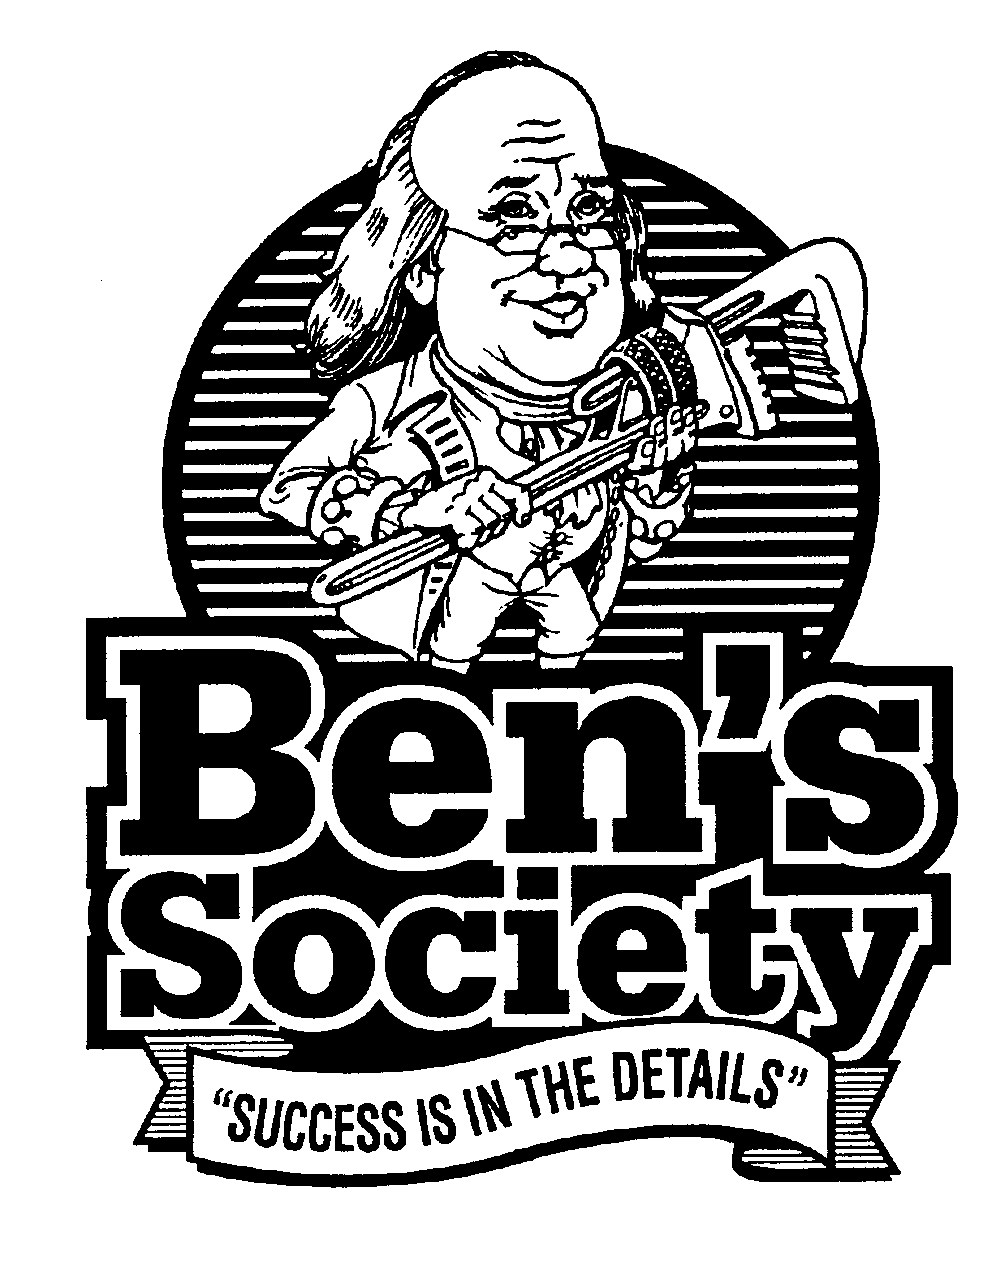  BEN'S SOCIETY "SUCCESS IS IN THE DETAILS"